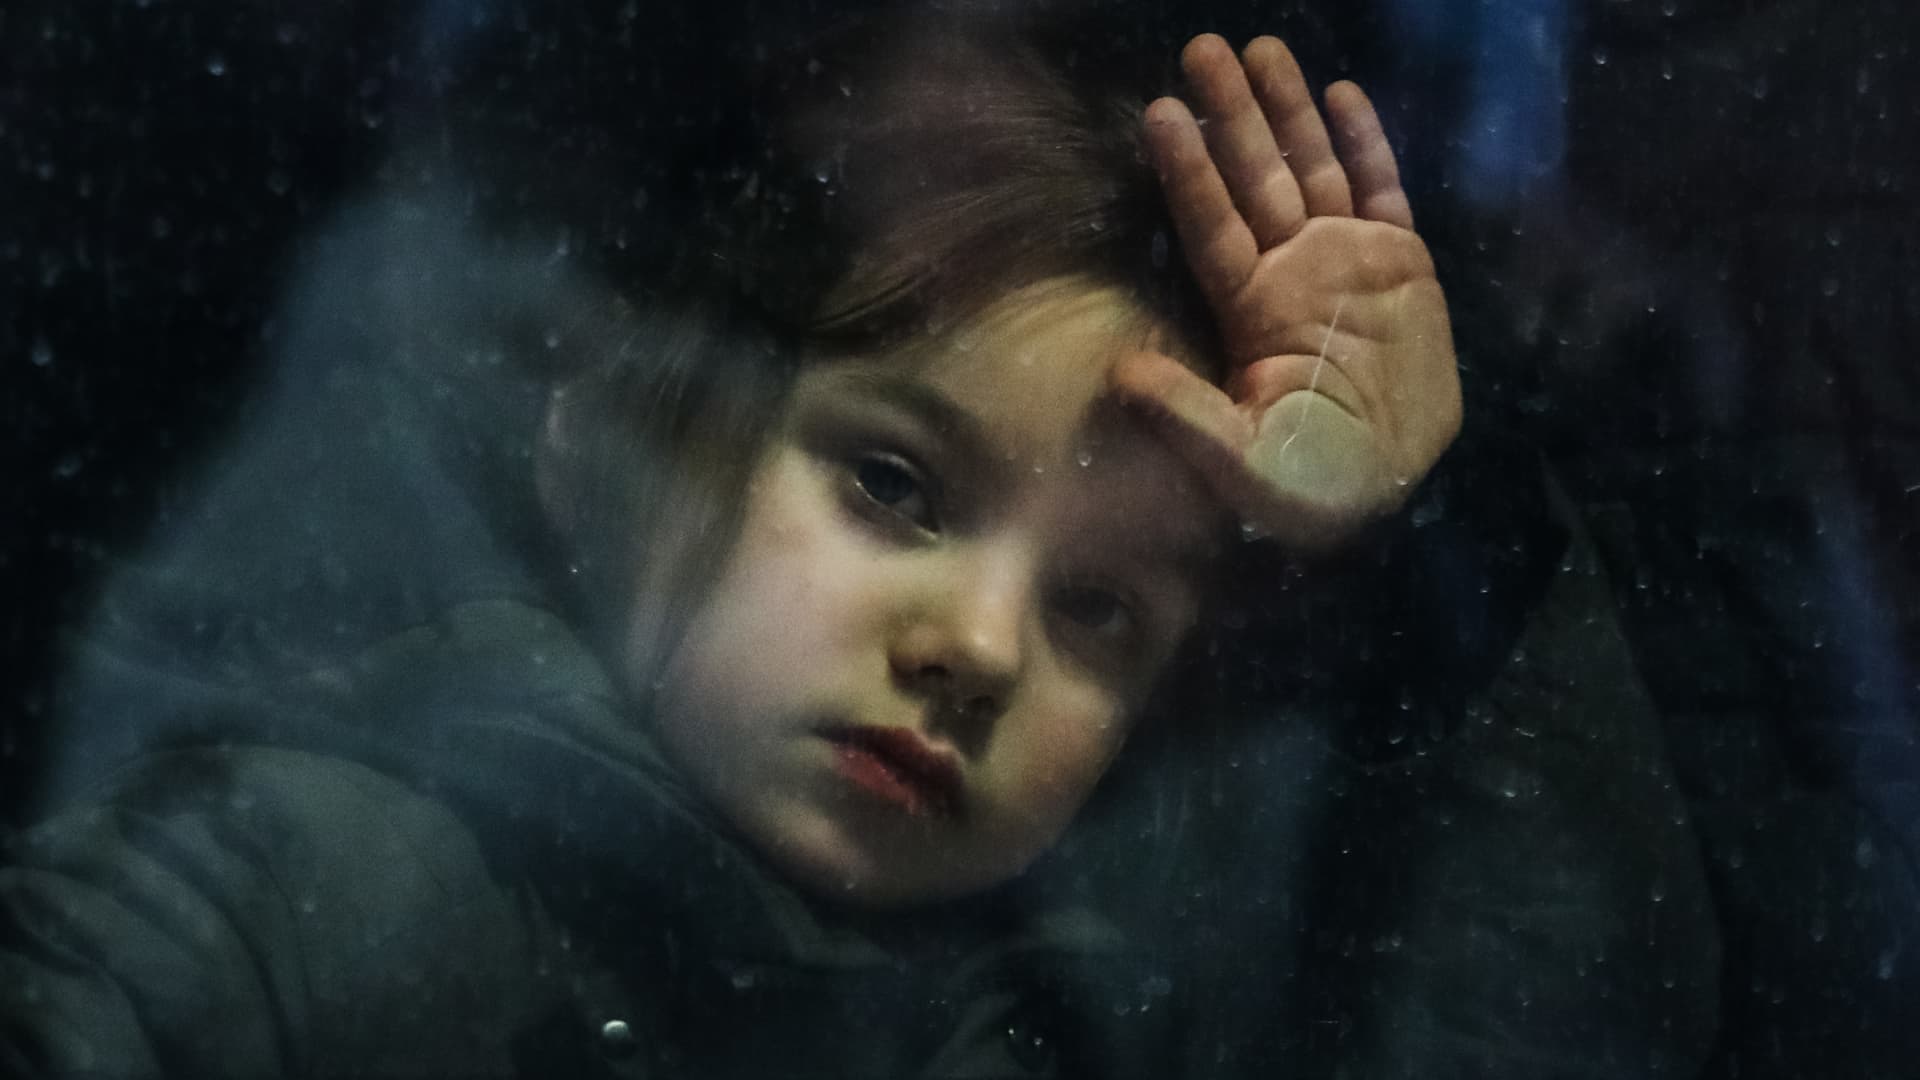 Refugee girl from Ukraine who arrived from Przemysl is seen on a train at the main railway station in Krakow, Poland on March 7, 2022.